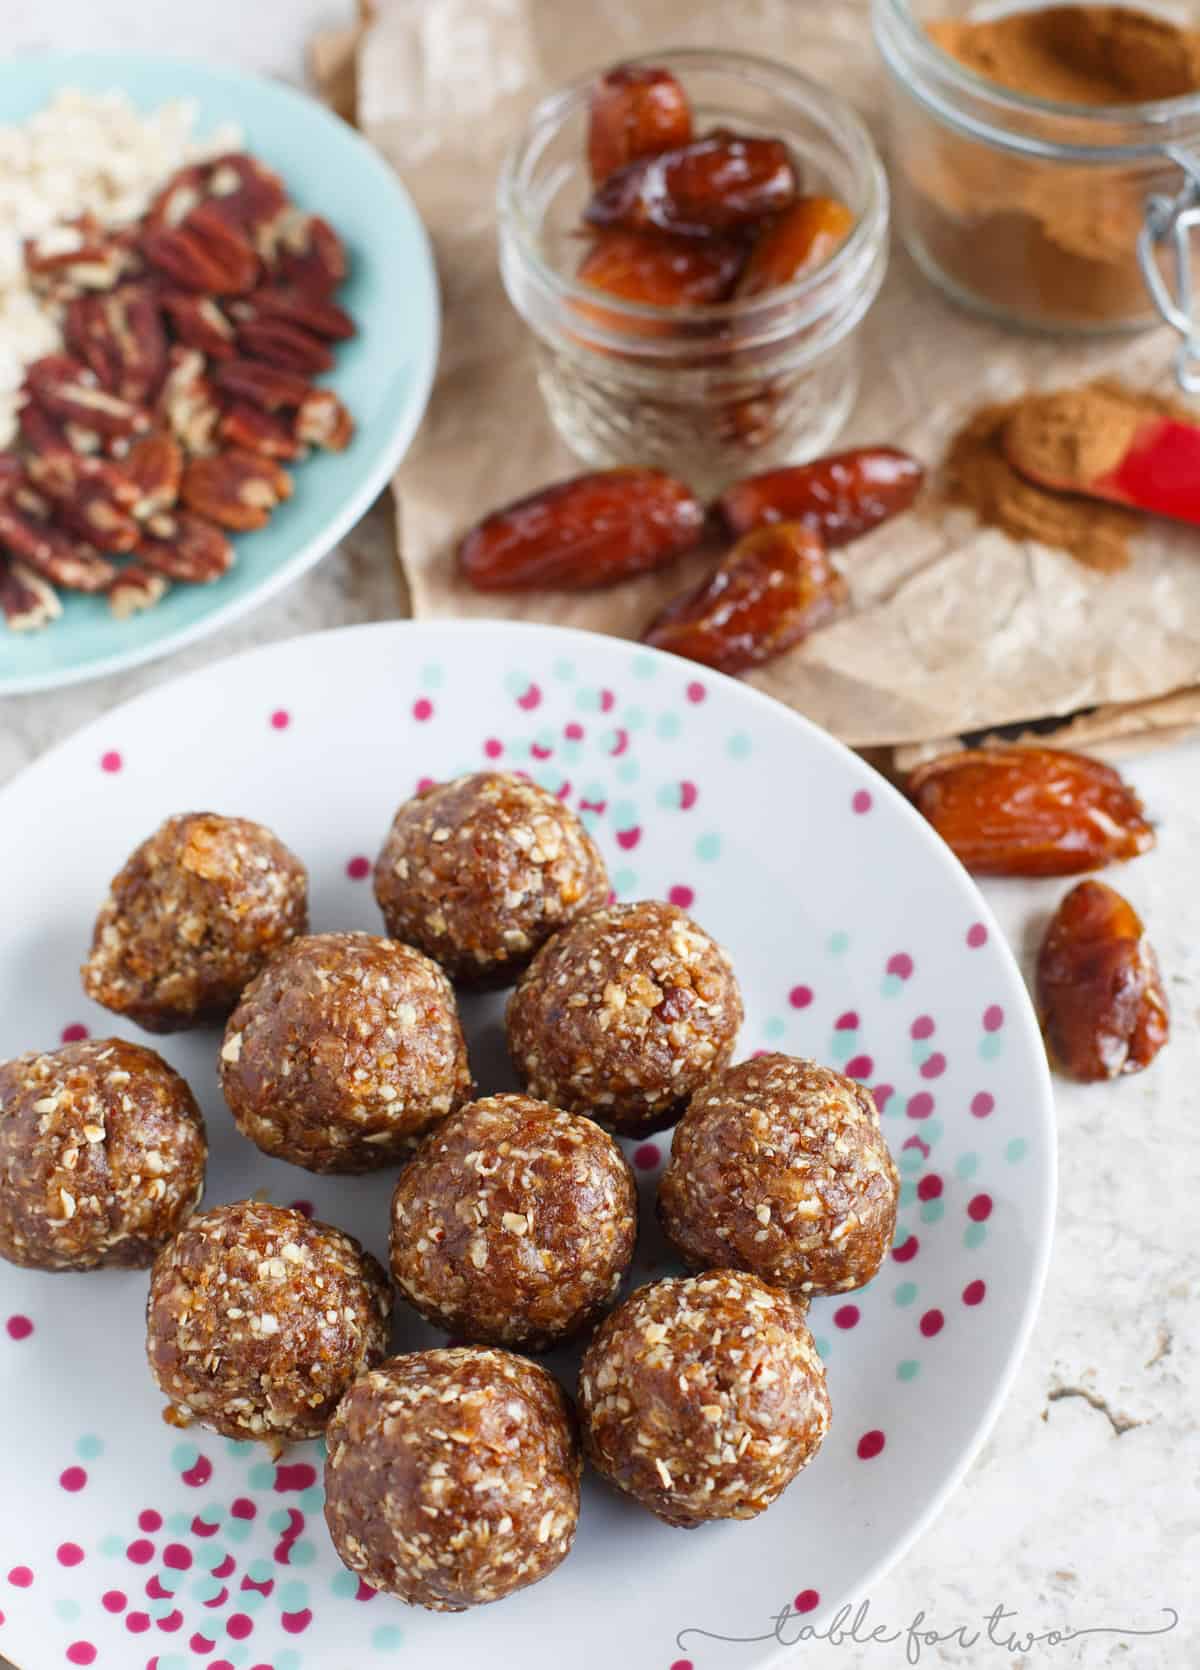 These pumpkin pie energy snack balls are the perfect sweet treat for the season! They're naturally sweetened and will curb any sweet tooth but you won't feel bad about it!